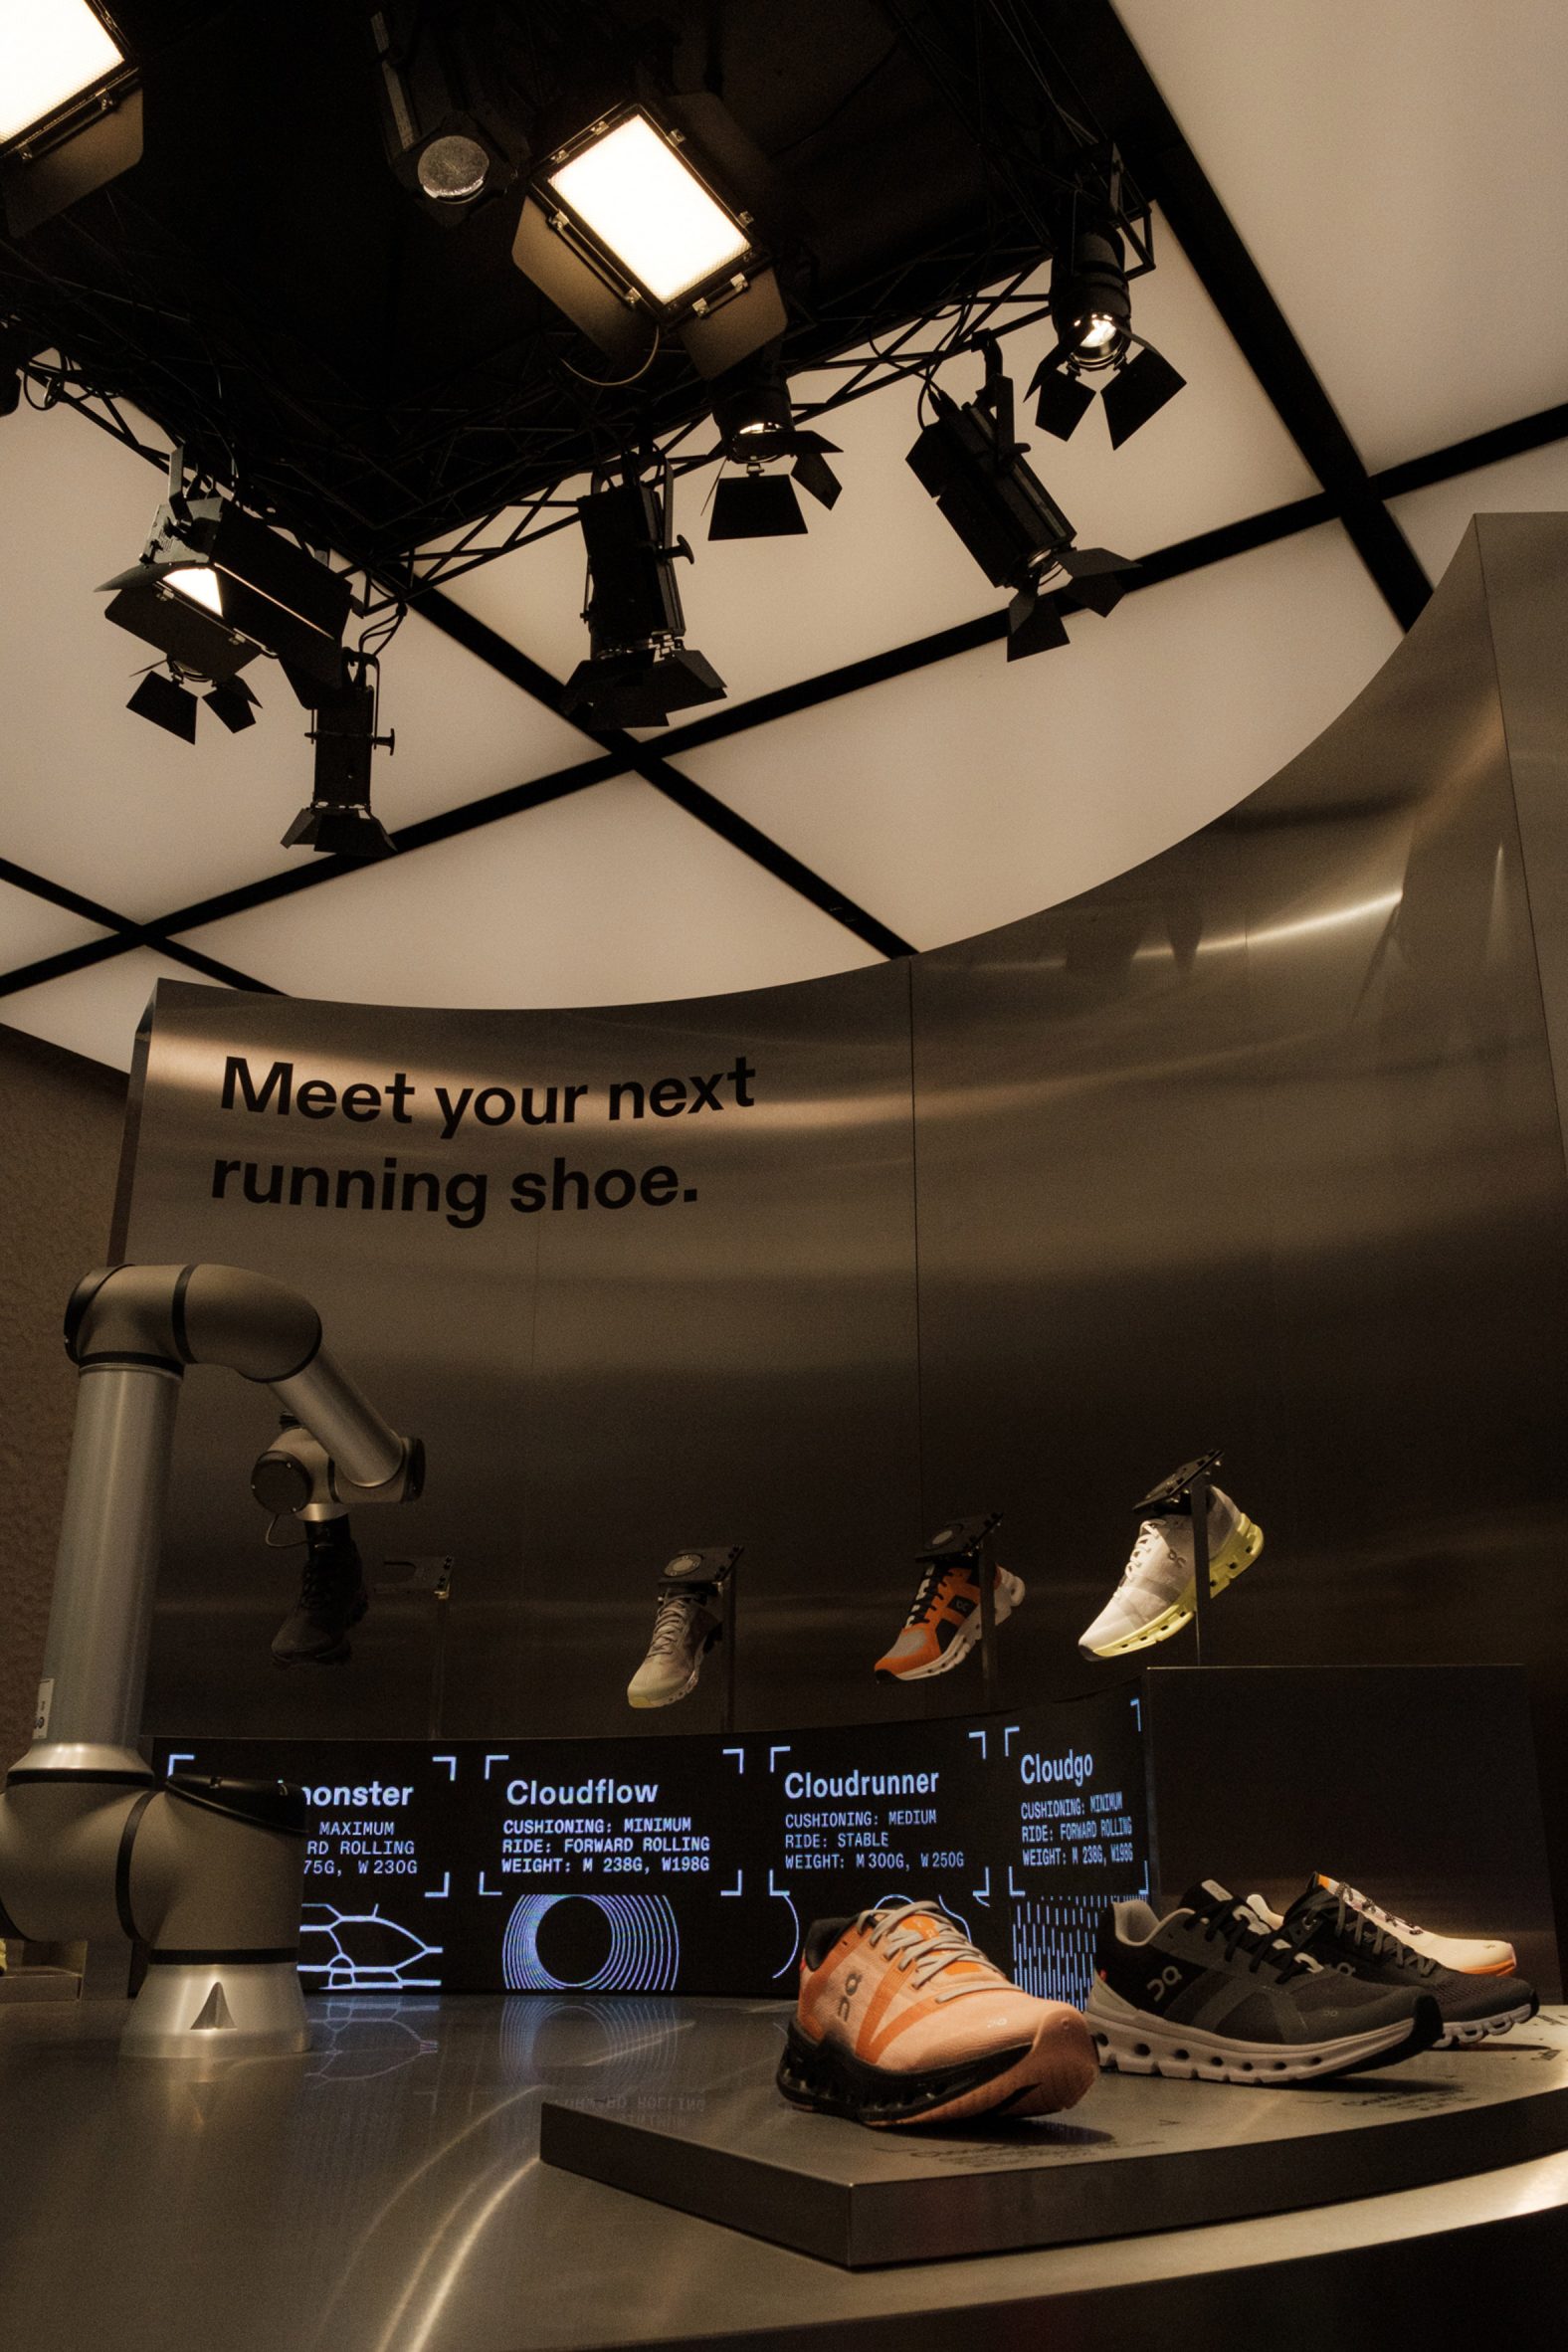 On models London trainer store on shoppable science museum